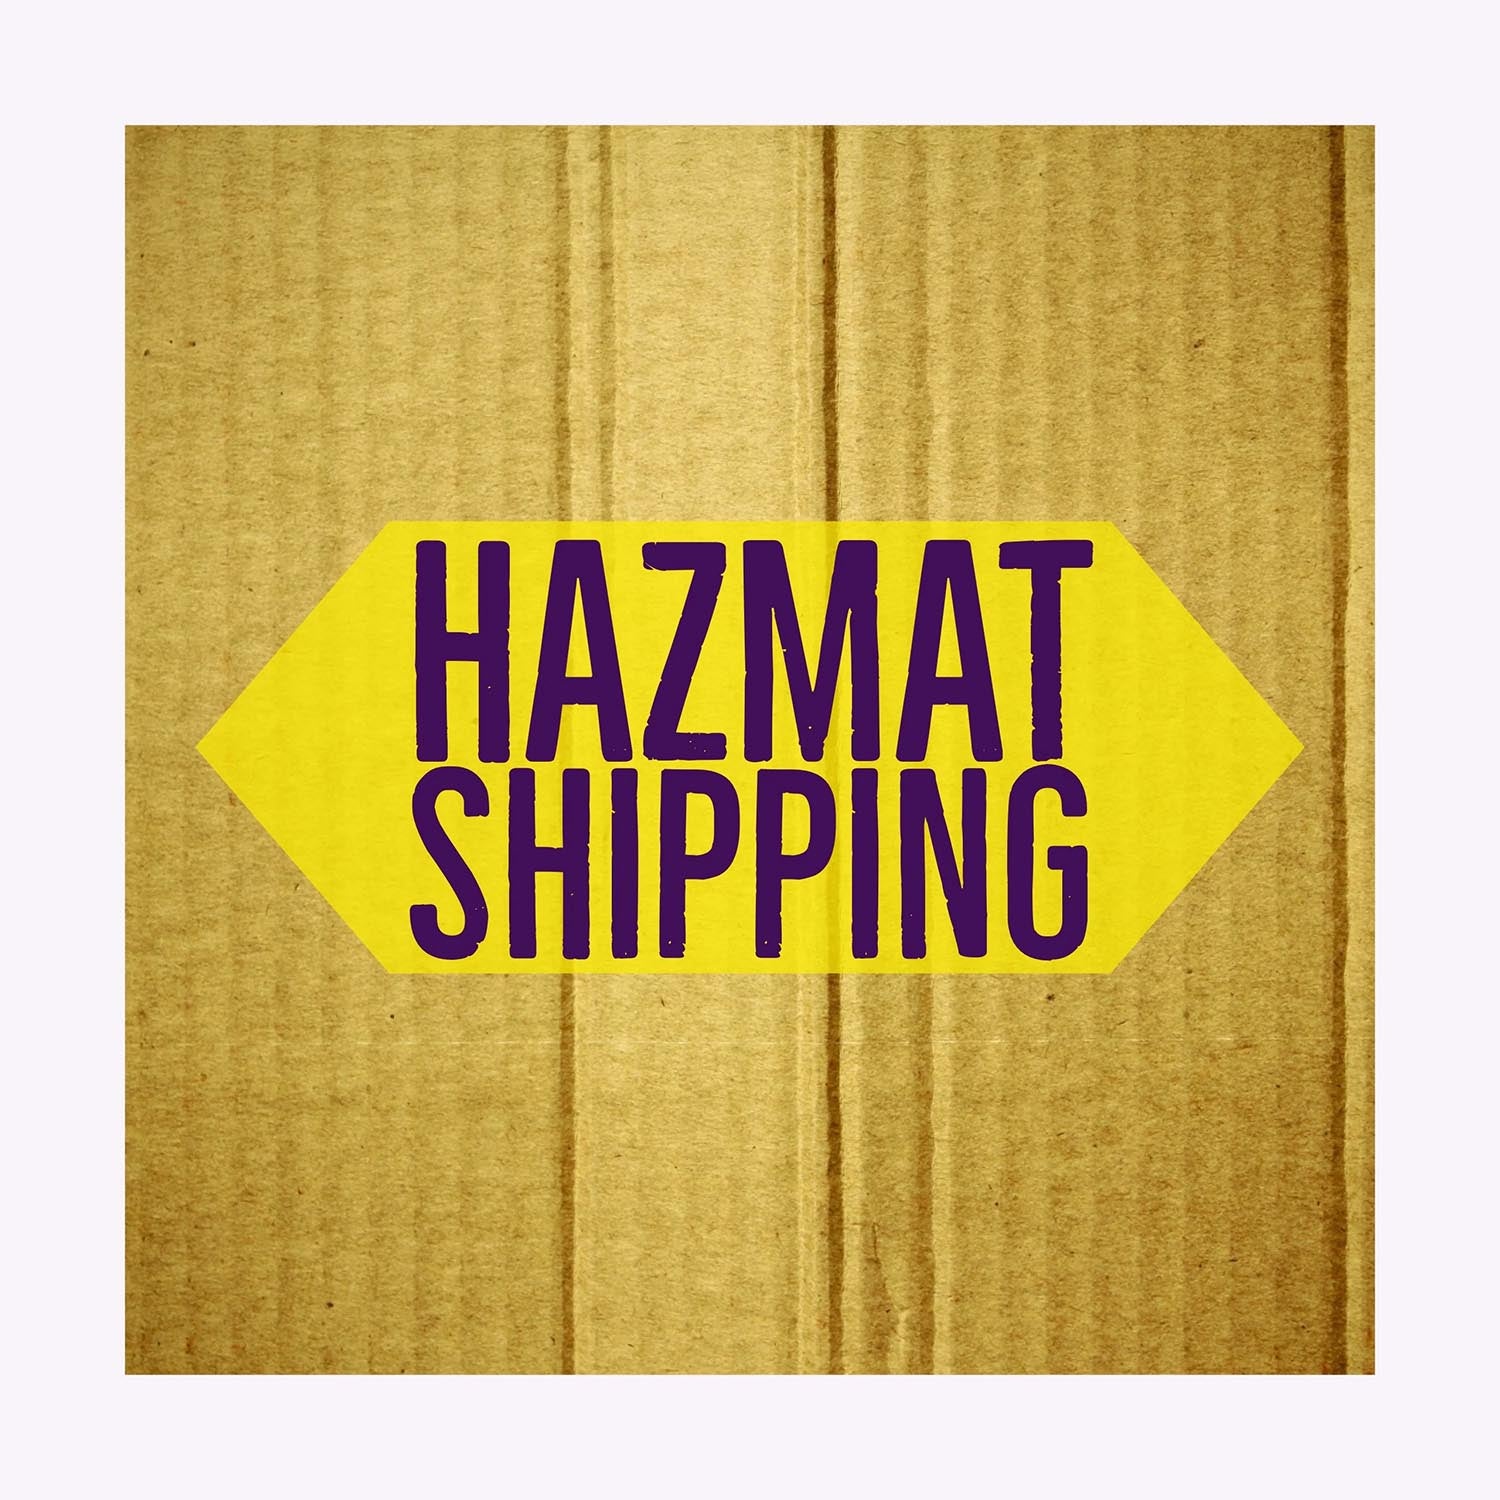 Hazardous Material Shipping Fee (15 gallons / 3 drums)